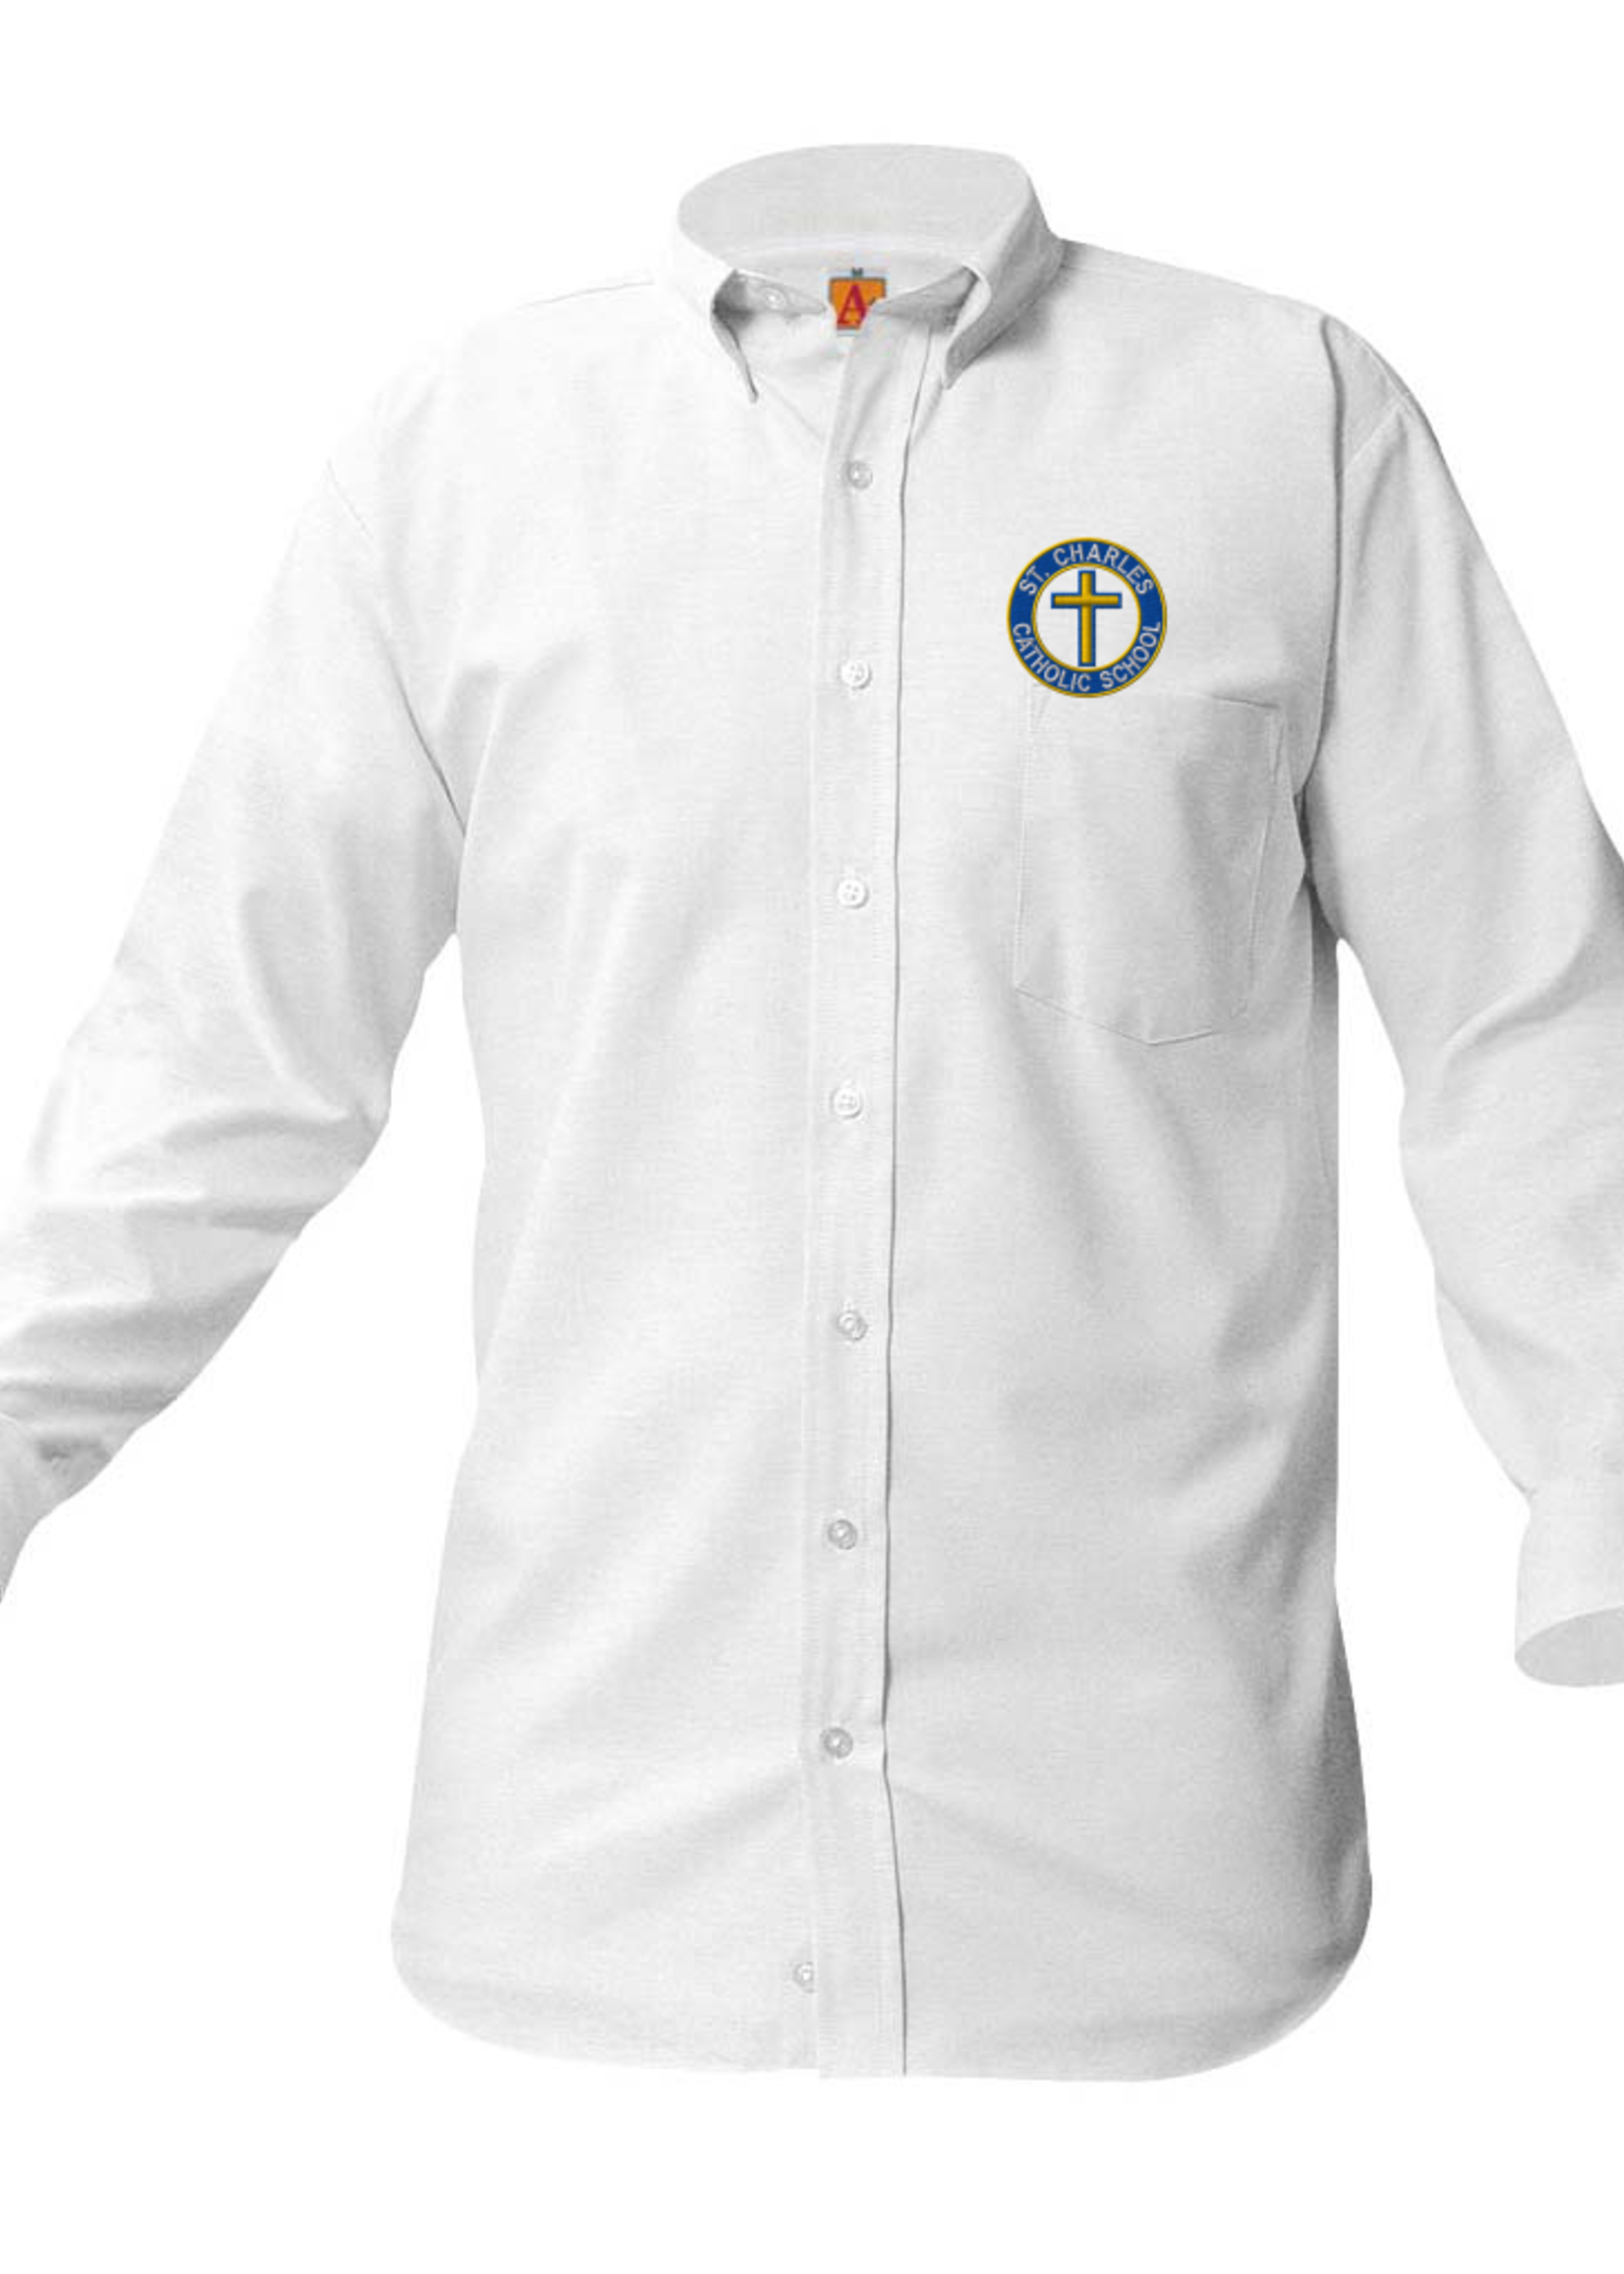 SCCS White Long Sleeve Oxford Shirt